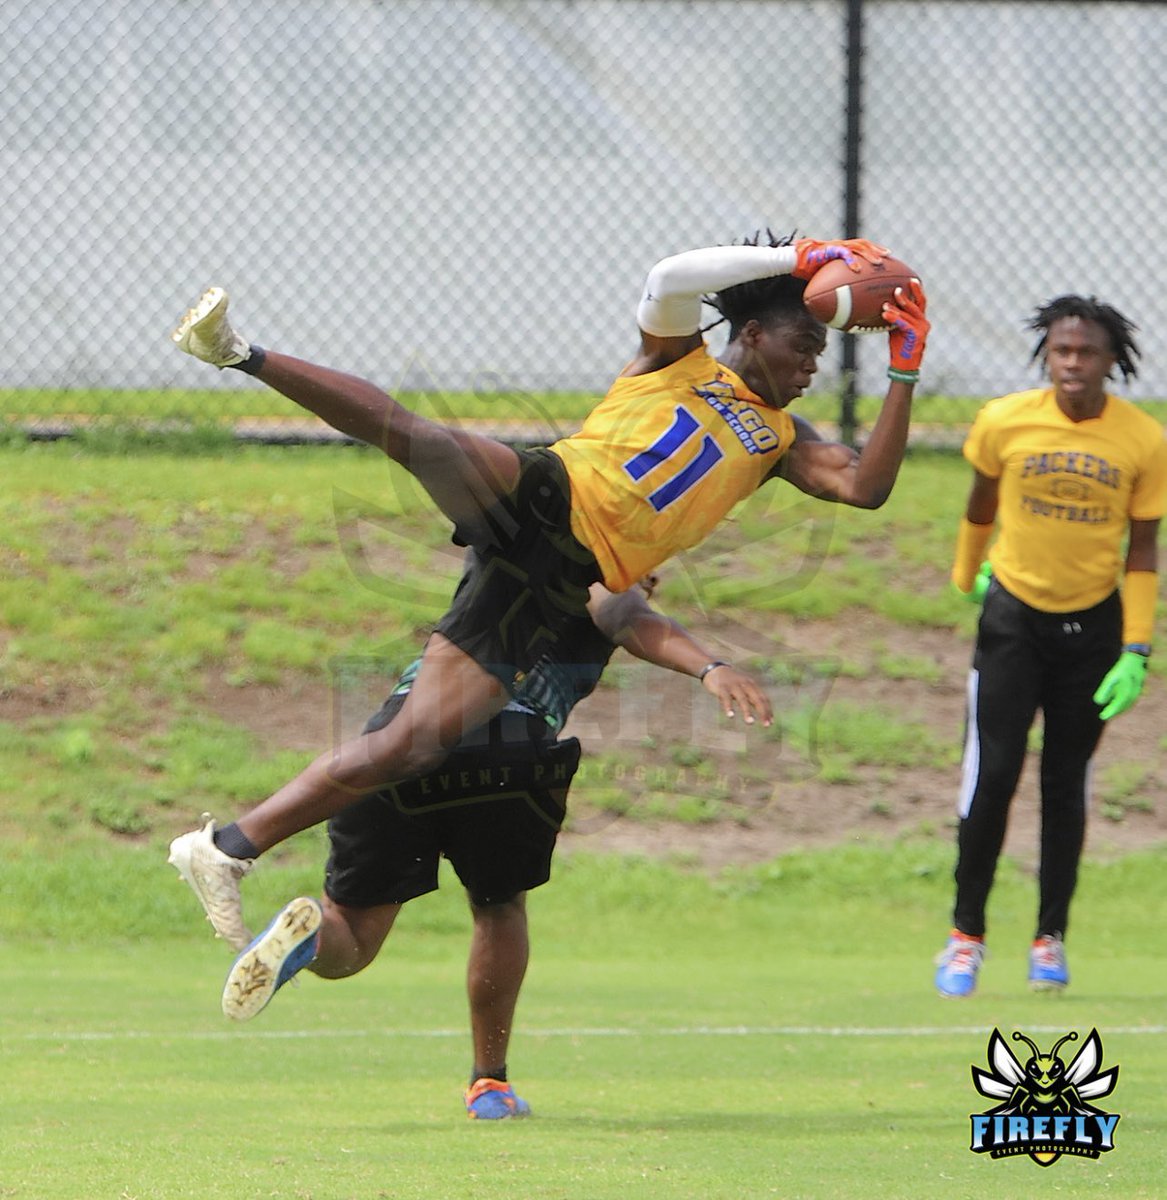 Very Productive Day Yesterday @UCF_Football 7v7, I had Some Crazy Catches and Lots of Fun 🖤💛#TrustTheProcess #TheMovement